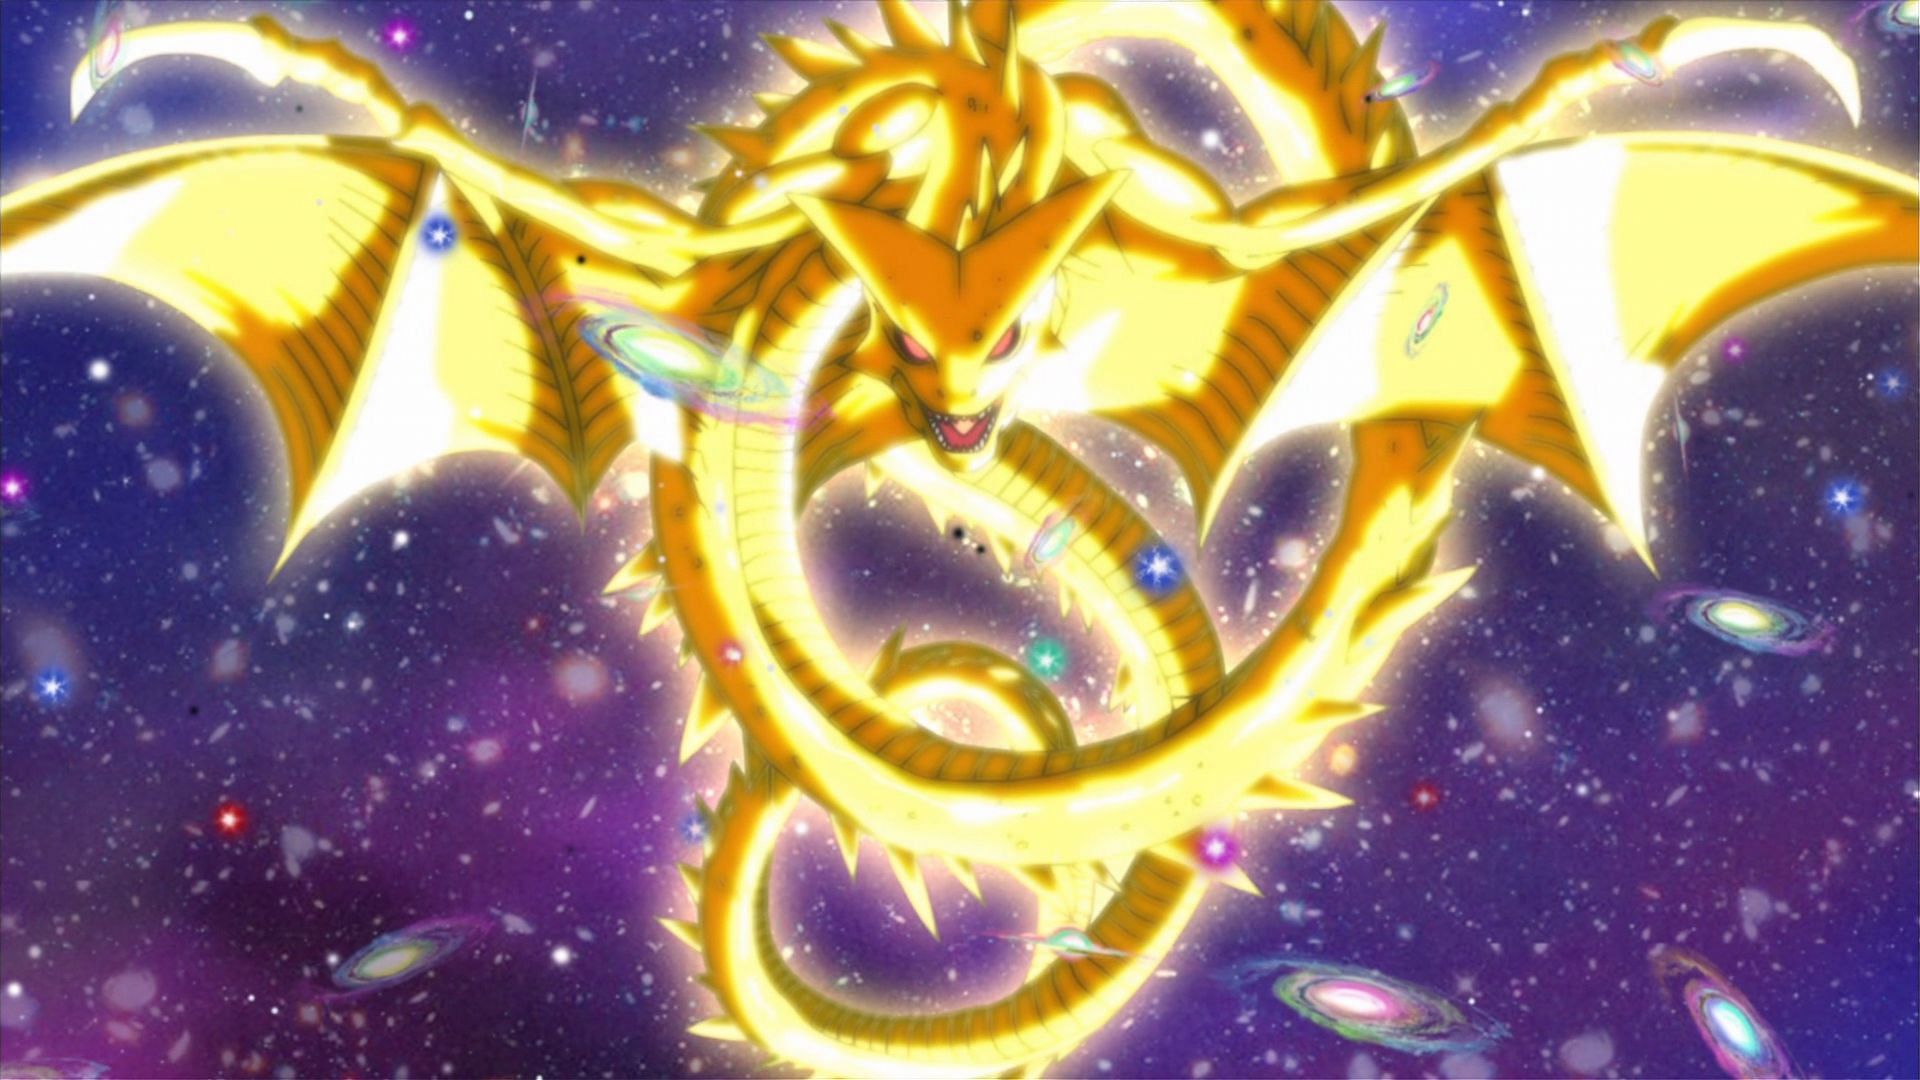 Super Shenron after being summoned in the Dragon Ball Super anime (Image via Toei Animation)